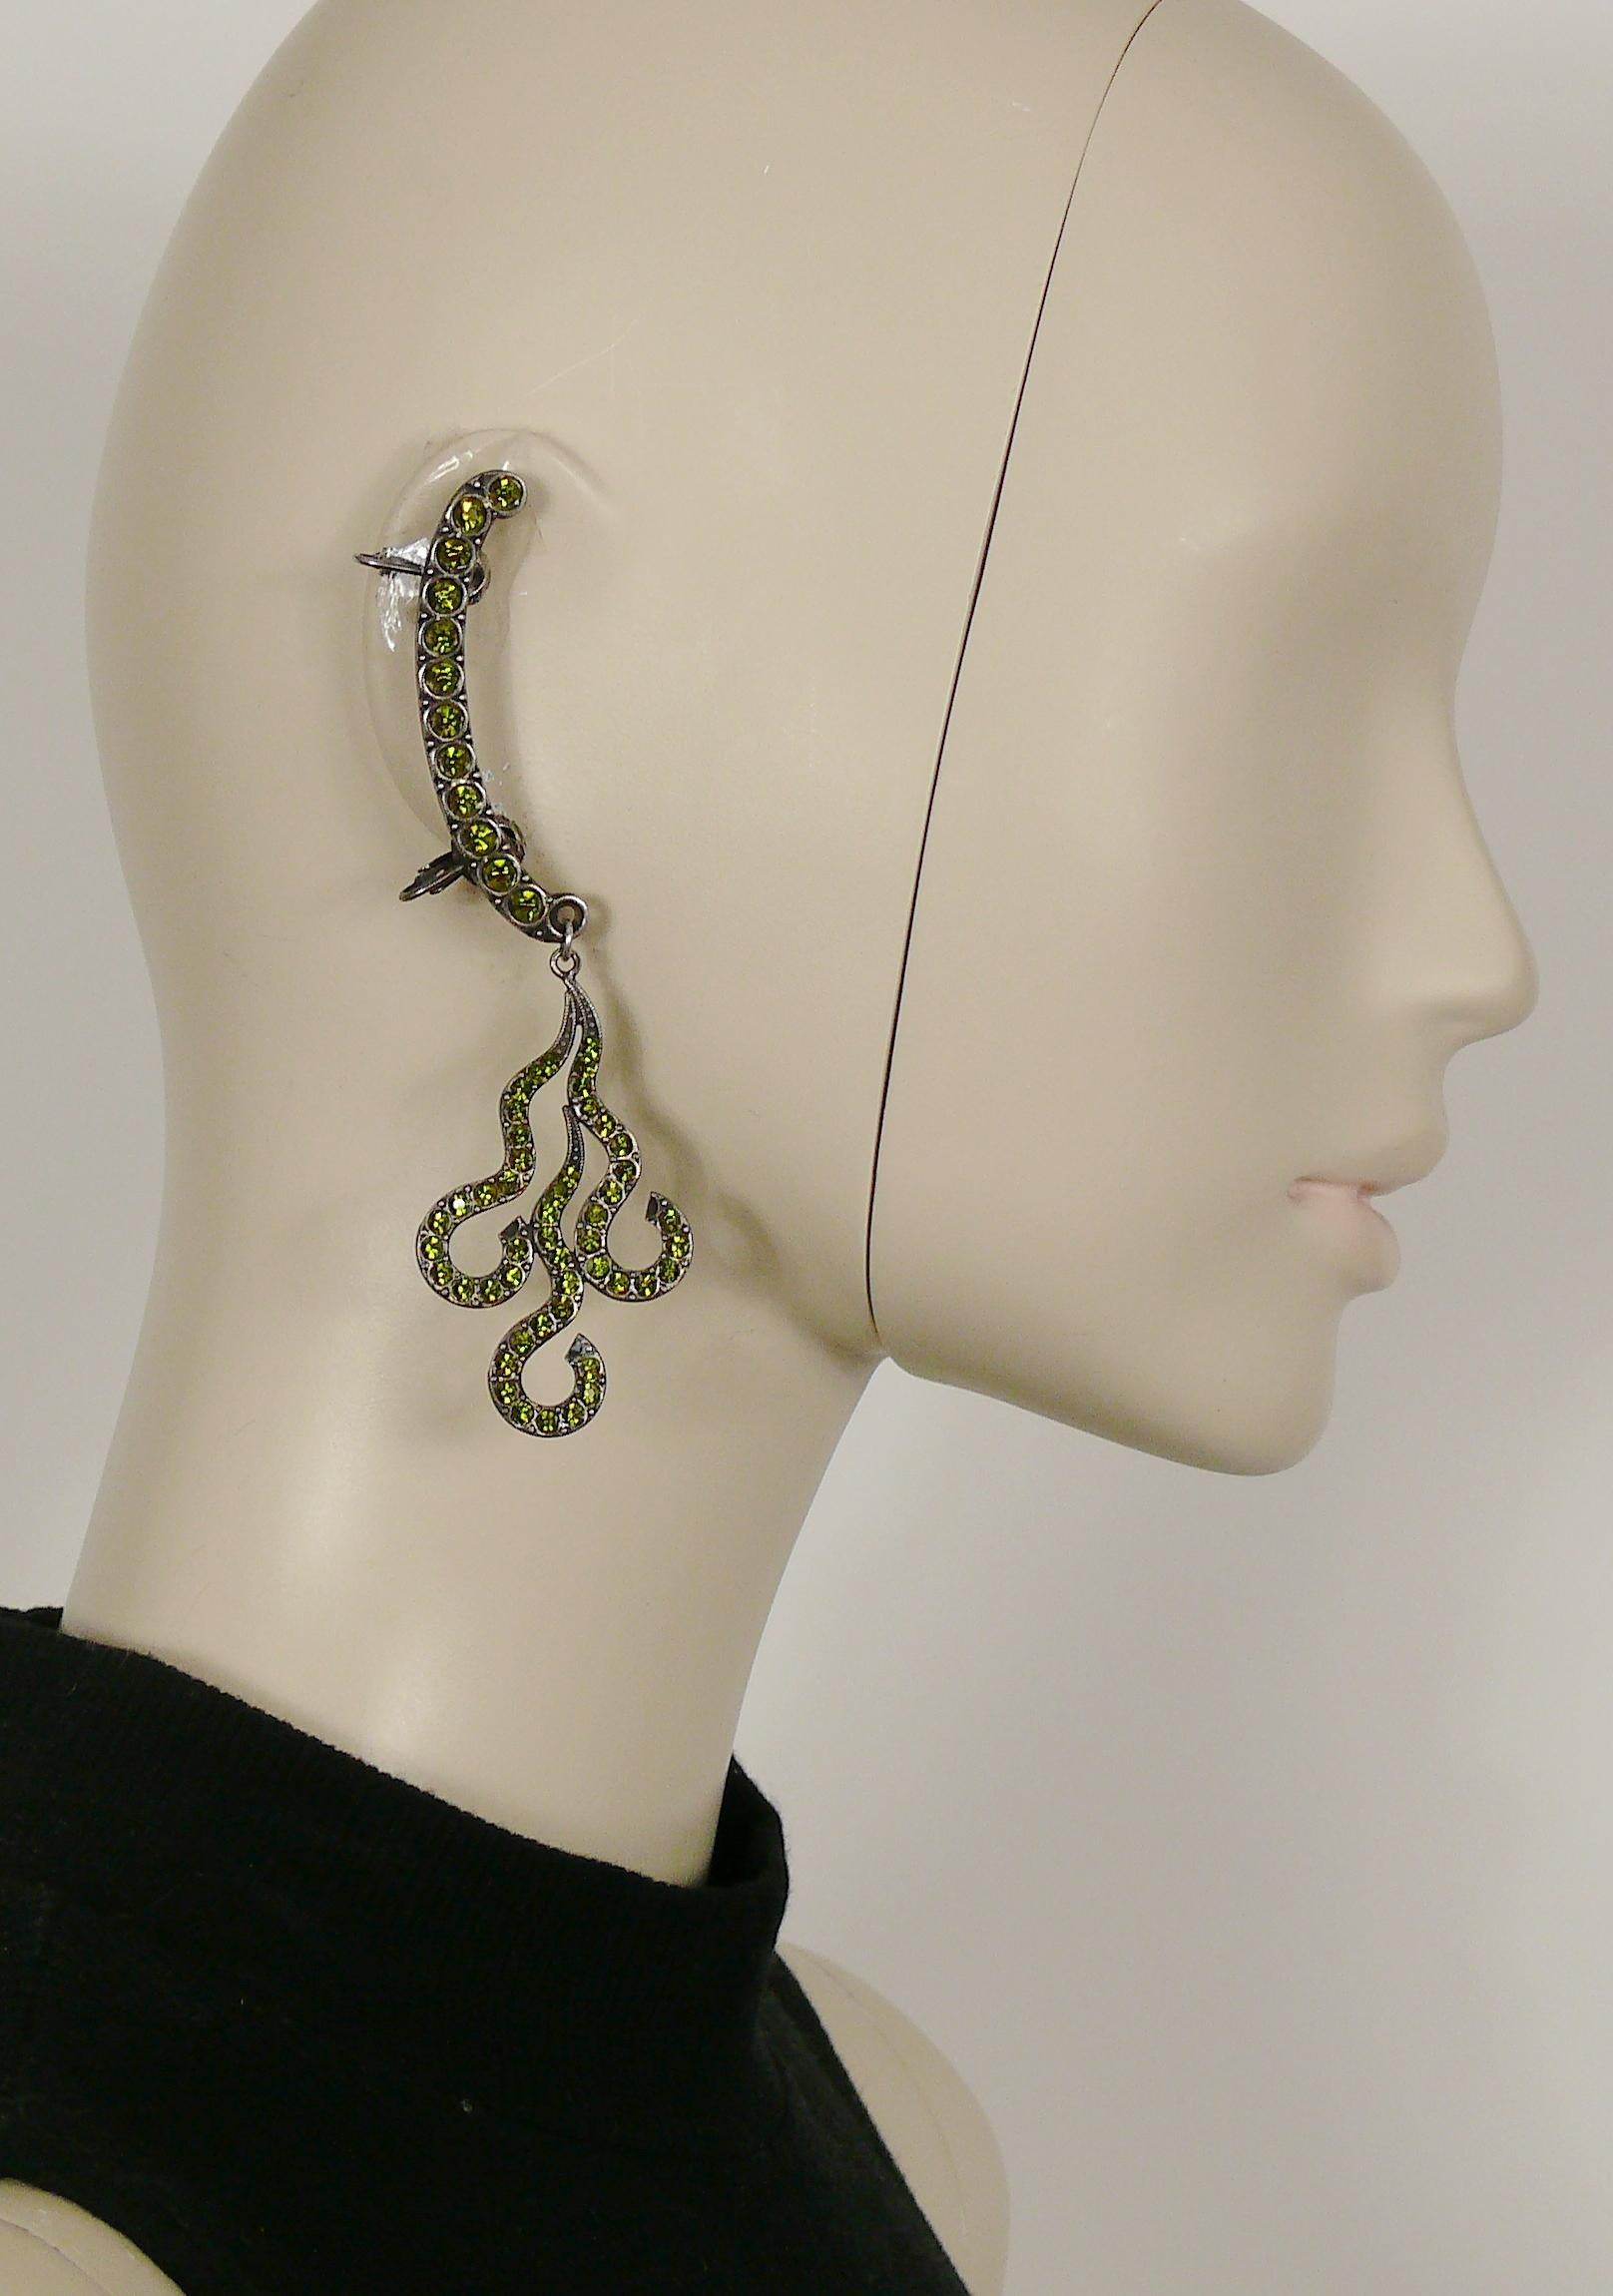 JEAN PAUL GAULTIER vintage rare antiqued silver toned ear cuffs embellished with green olivine crystals and featuring a stylized flame pendant.

Marked GAULTIER.

Indicative measurements : max. length approx. 11.5 cm (4.53 inches).

NOTES
- This is